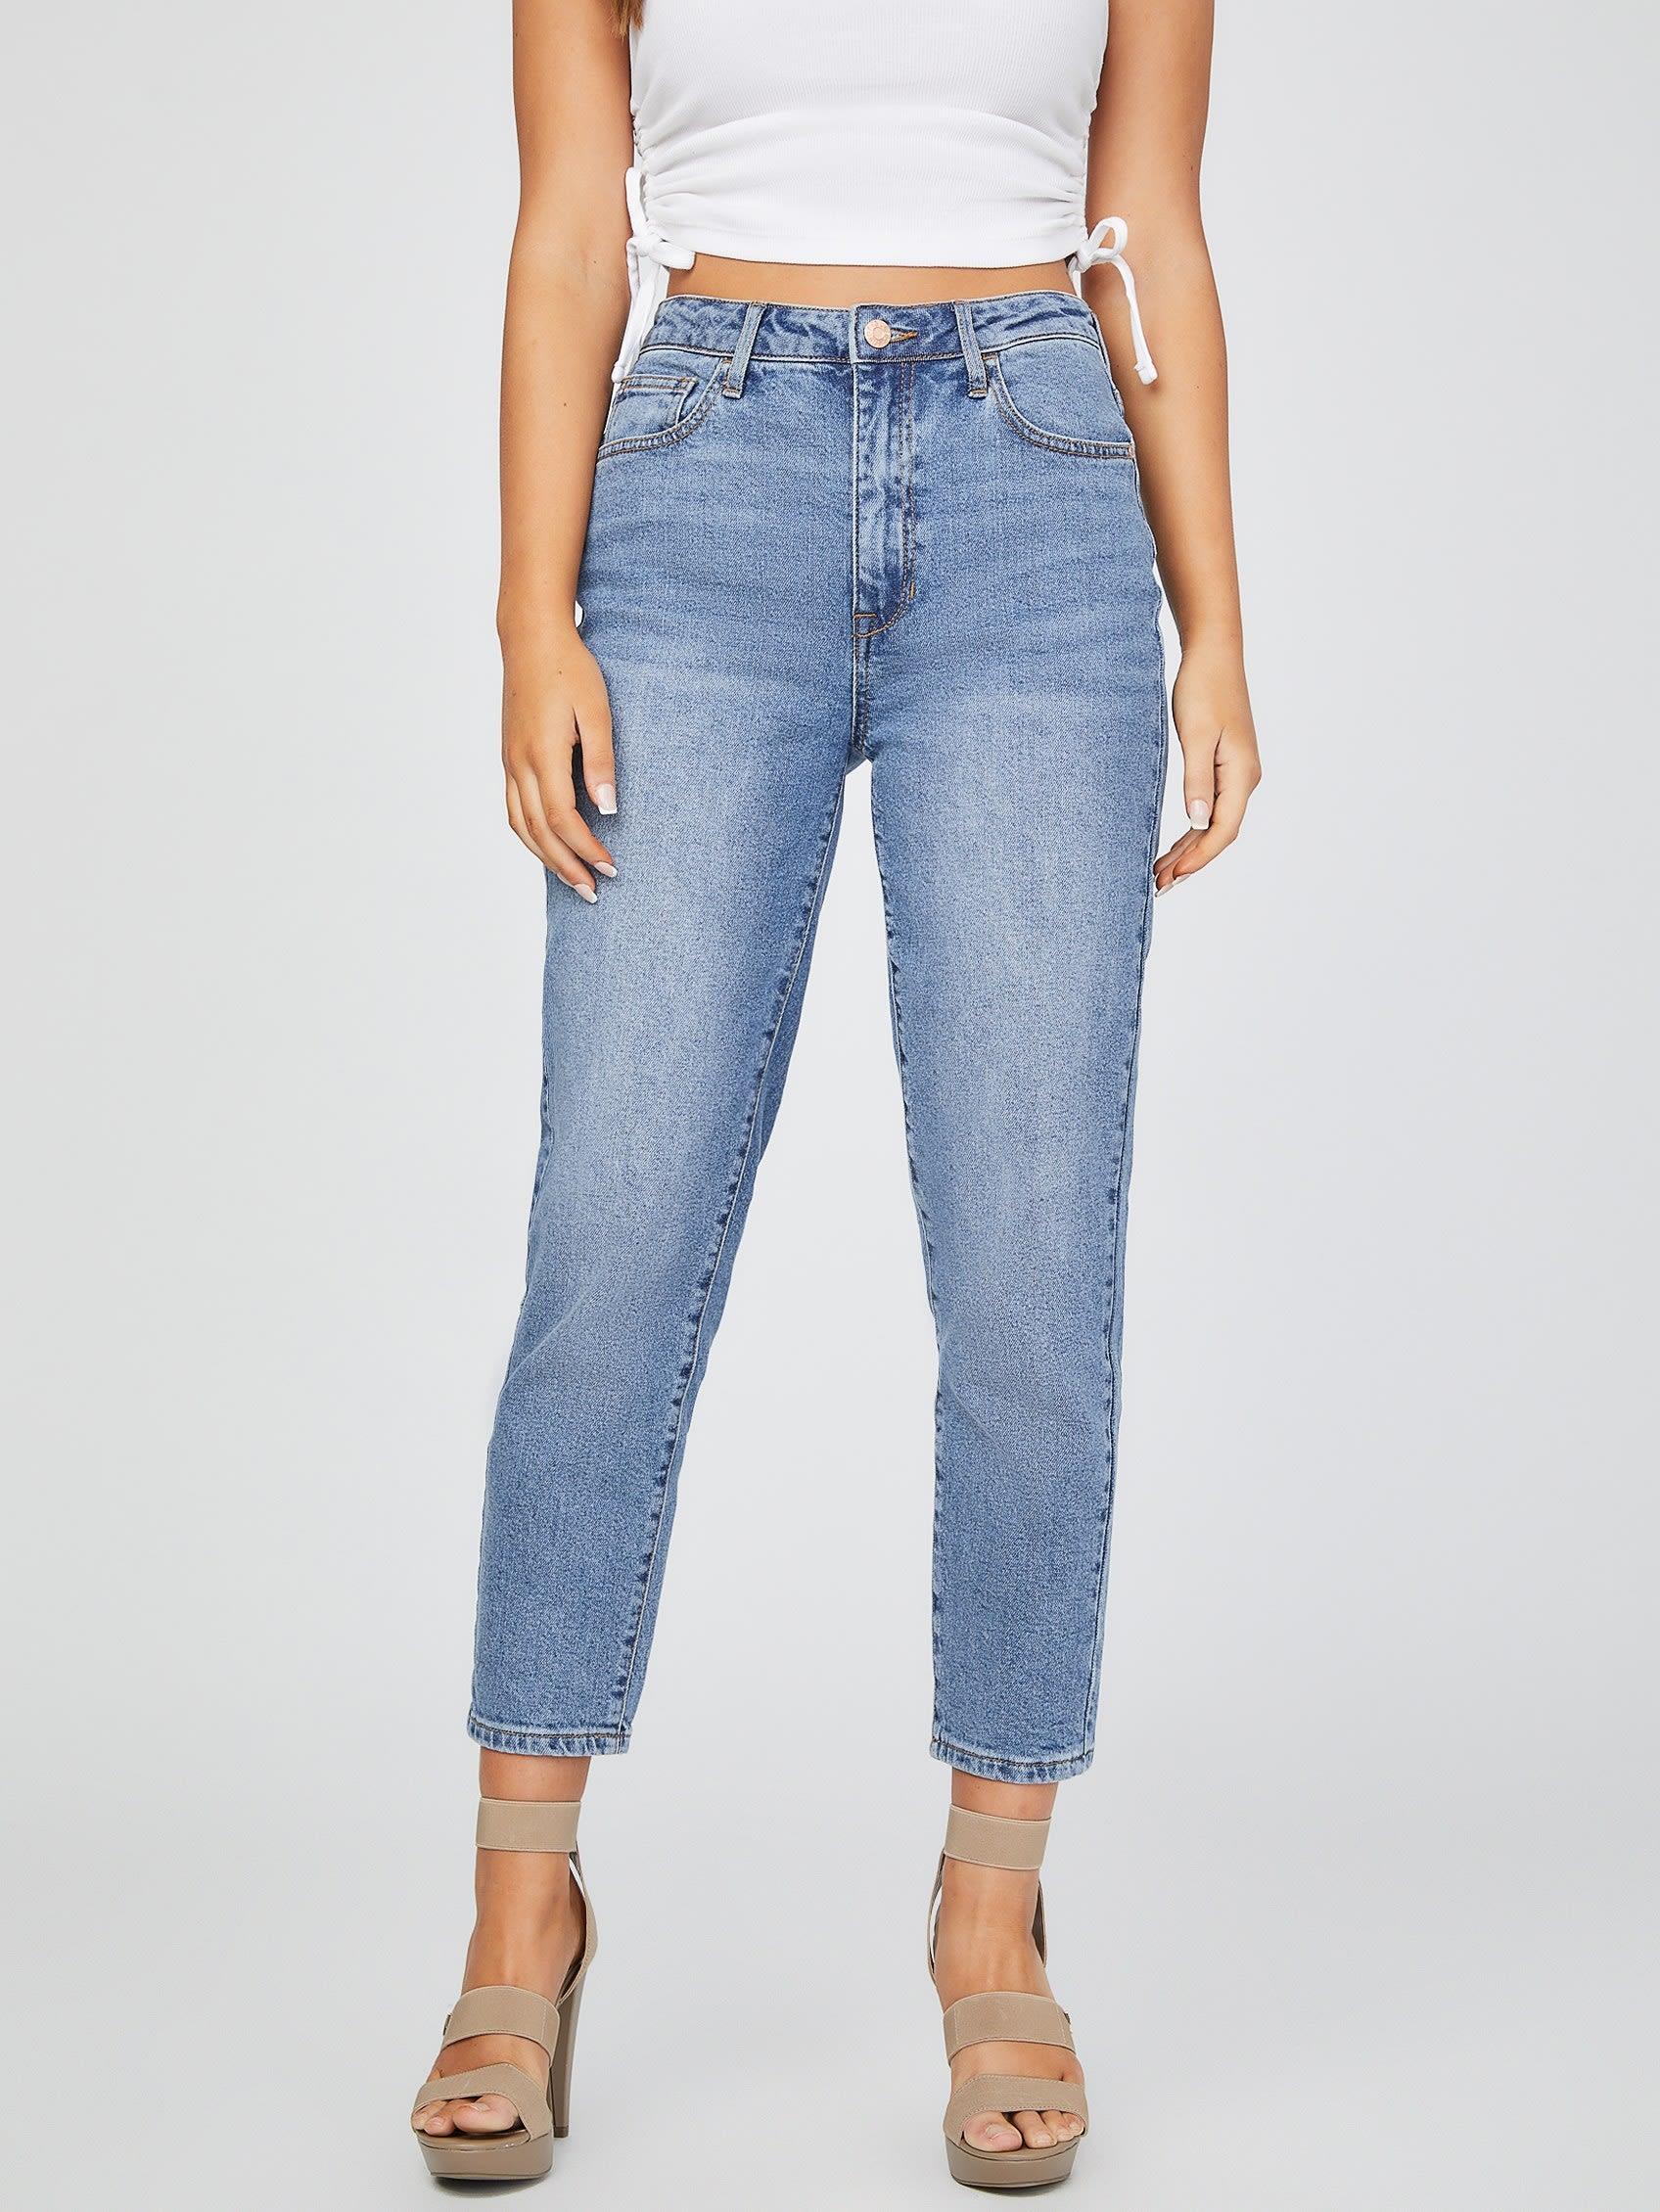 Guess Factory Tiffany Classic Mom Jeans in Blue | Lyst